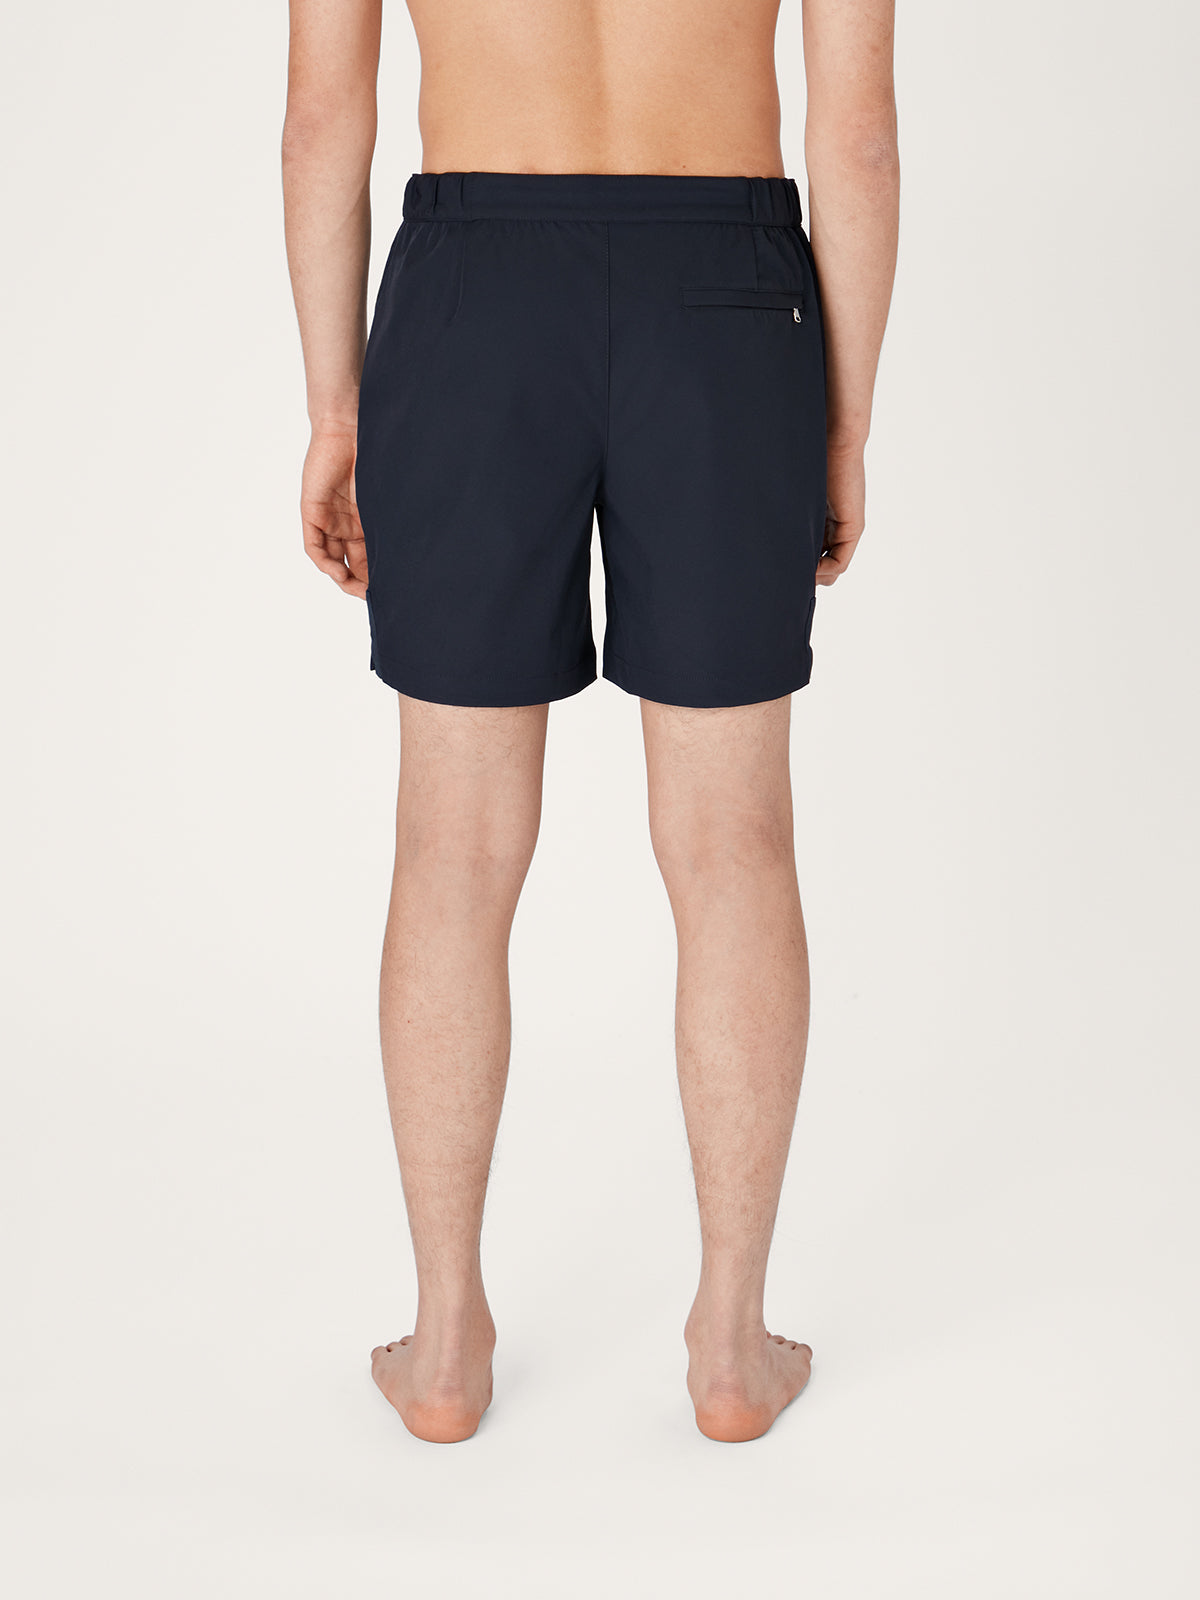 The Anywear Short 2.0 || Navy | Recycled nylon with netting